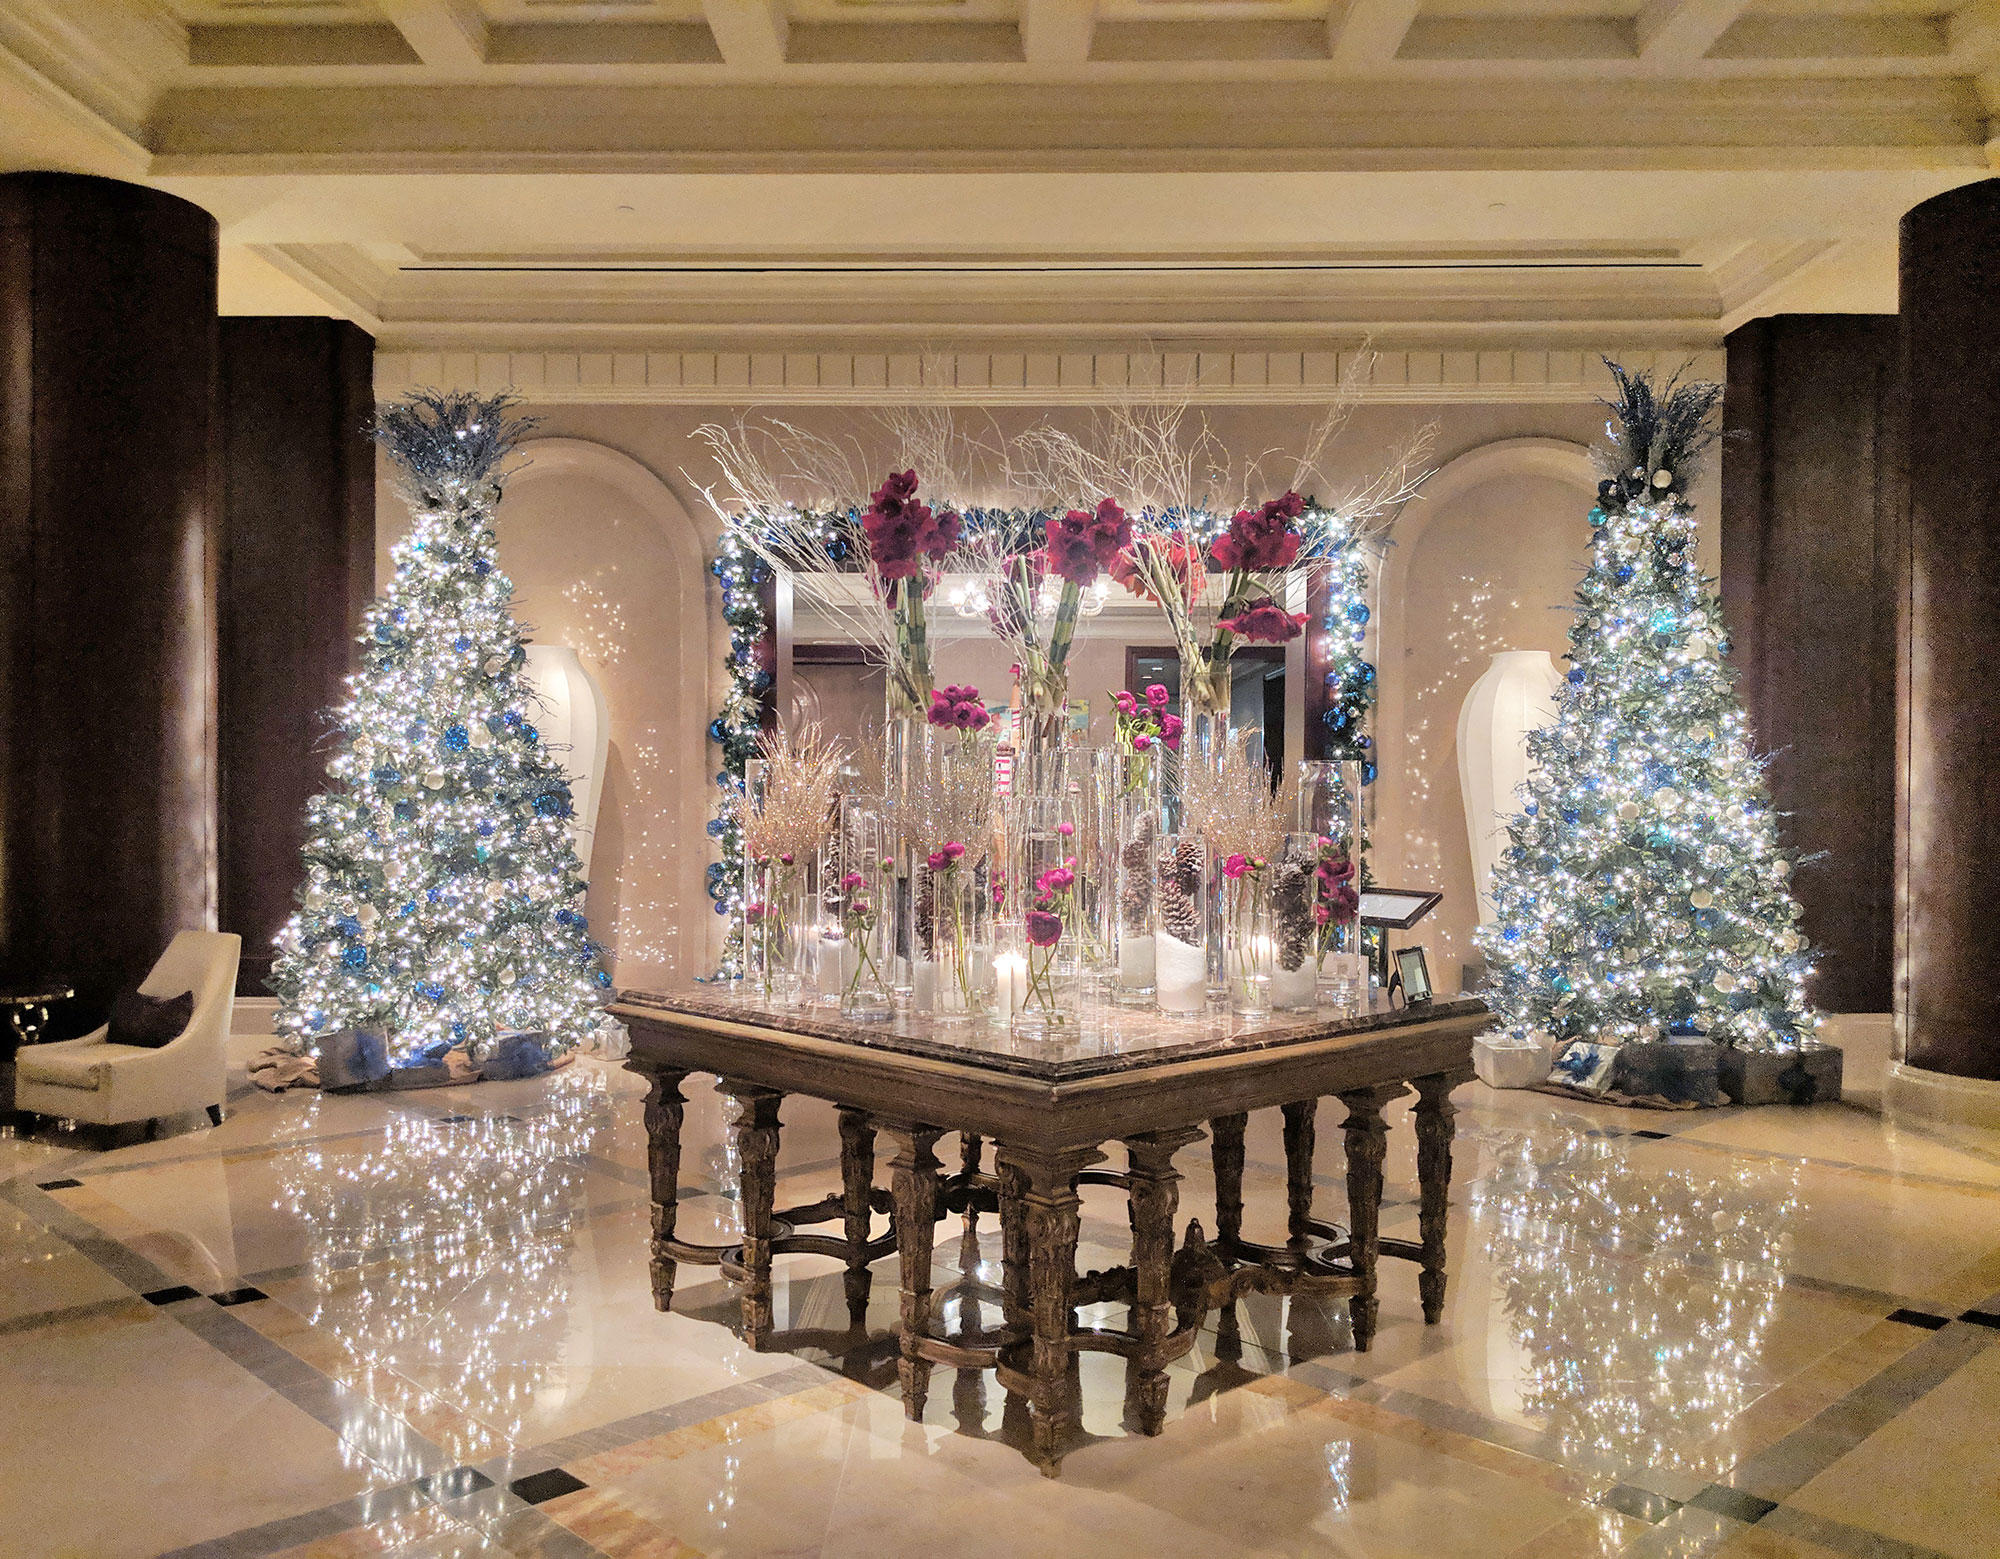 The lobby of the Ritz Carlton in Uptown, Dallas.